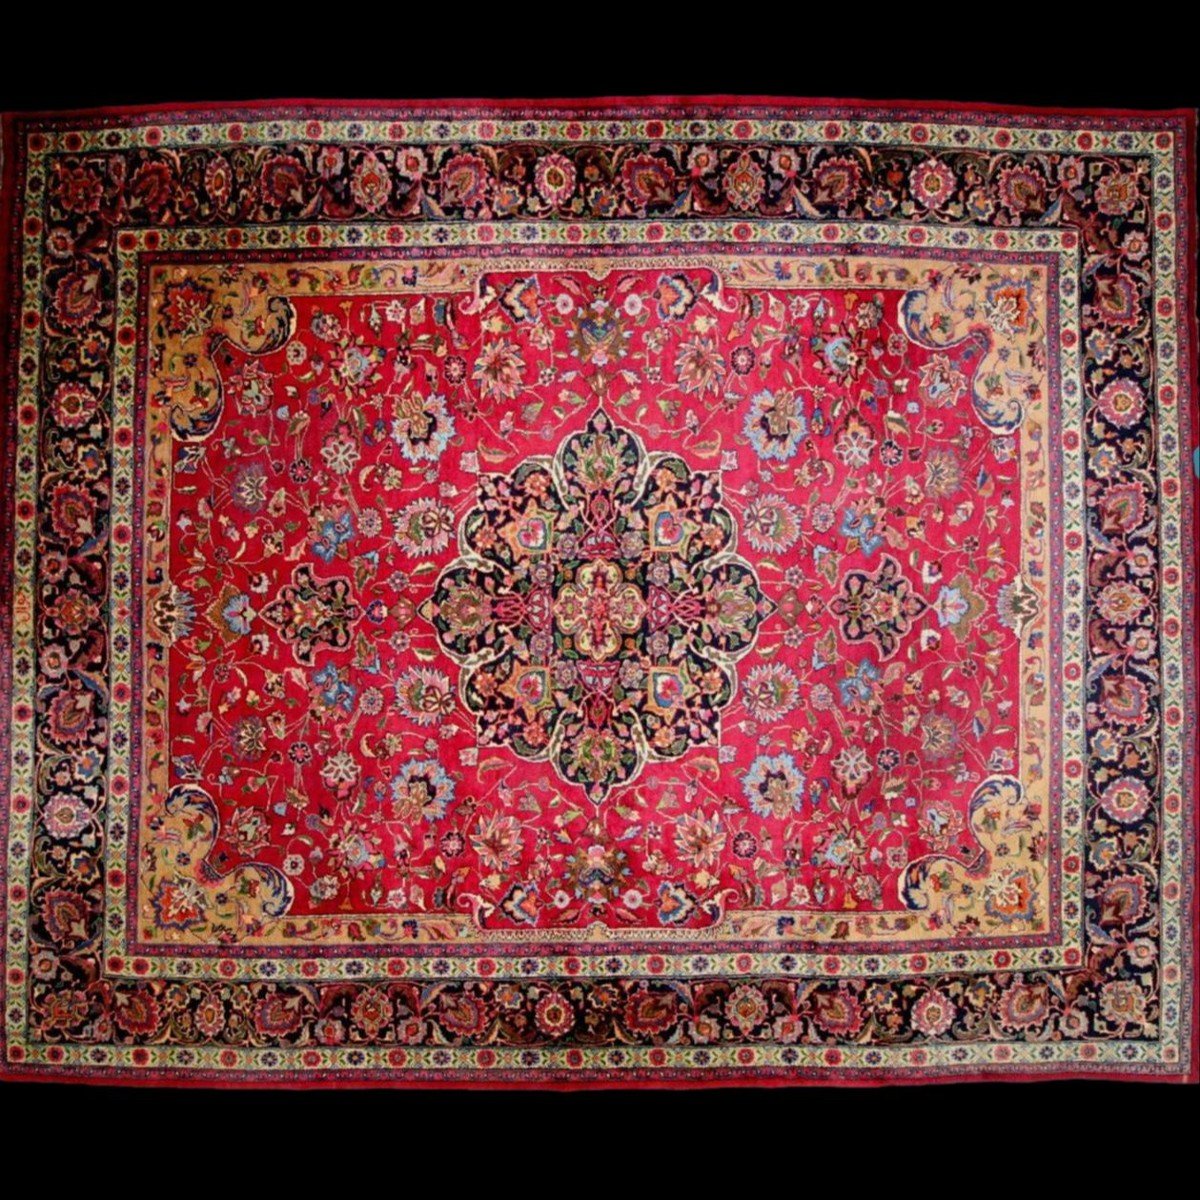 Macchad Rug, 300 Cm X 390 Cm, Hand-knotted Kork Wool In Iran Circa 1980 In Very Good Condition-photo-2